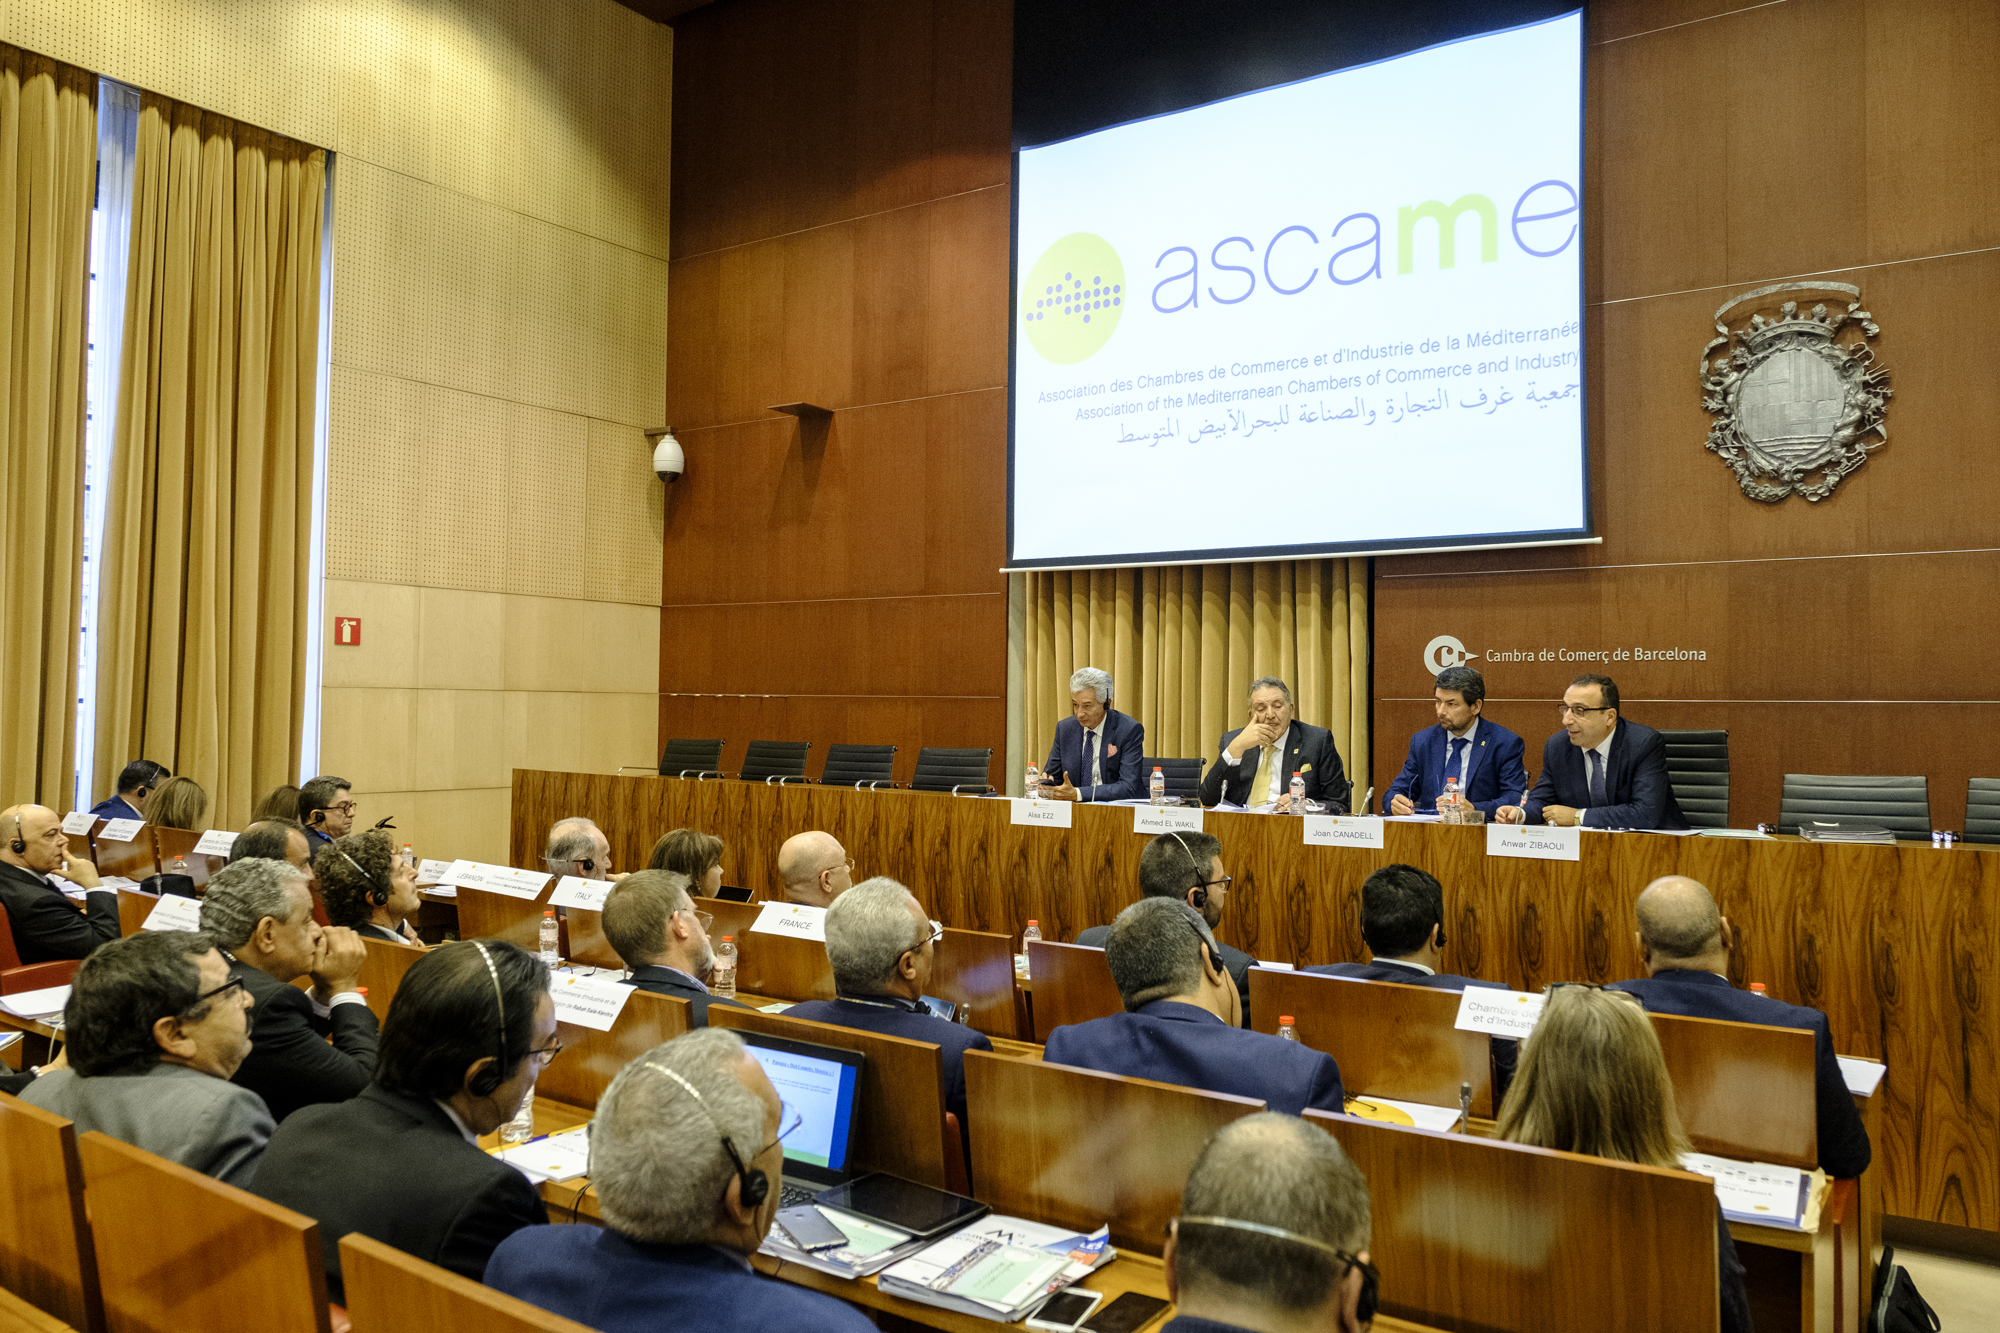 ASCAME, the Association of the Mediterranean Chambers of Commerce and Industry, approved at its last Executive Committee meeting a statement that called for solidarity with Lebanon and its pe